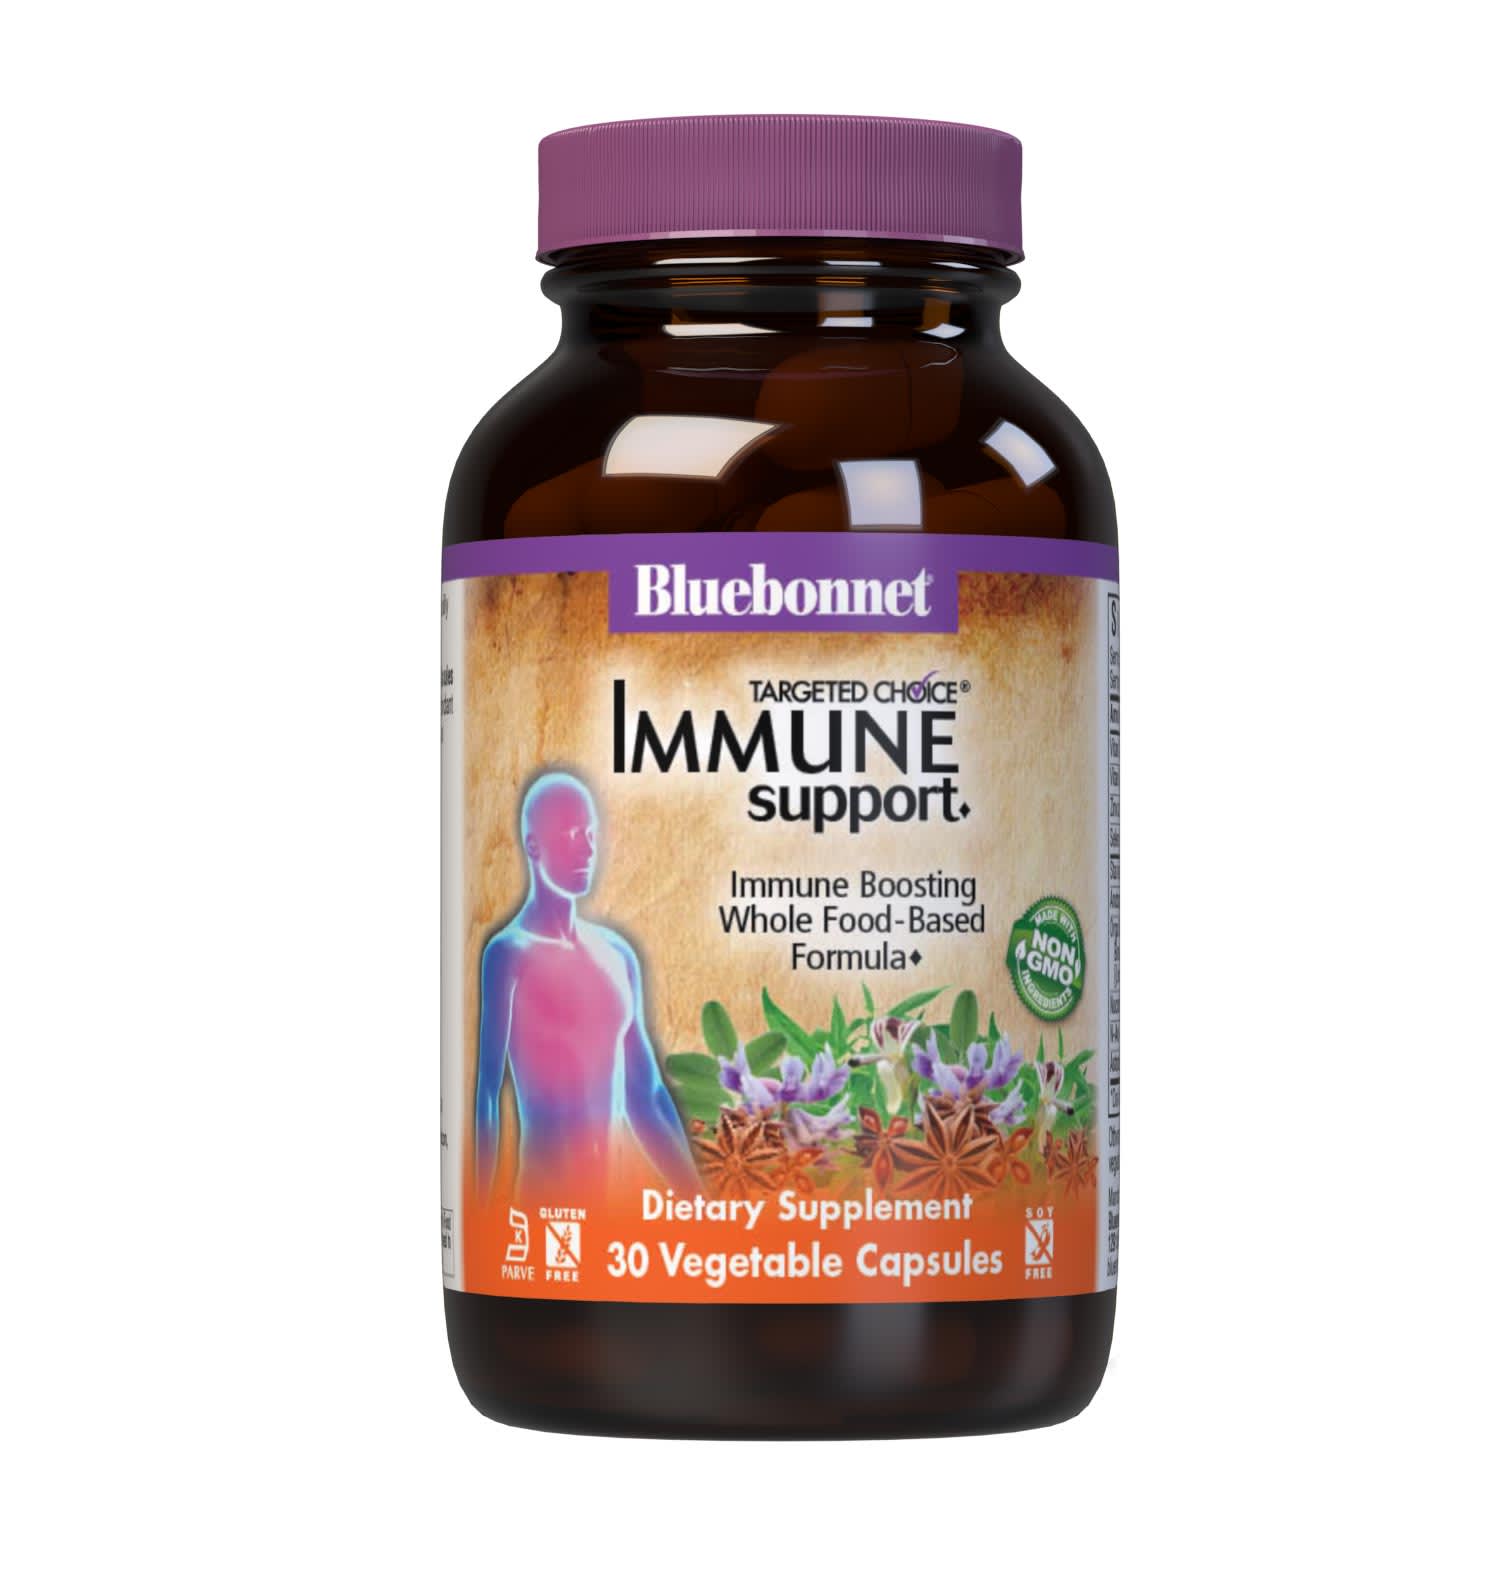 Bluebonnet’s Targeted Choice Immune Support 30 Vegetable Capsules are specially formulated to support immune function and antioxidant protection with a unique combination of vitamins, minerals and immune-boosting nutrients for optimal wellness. #size_30 count